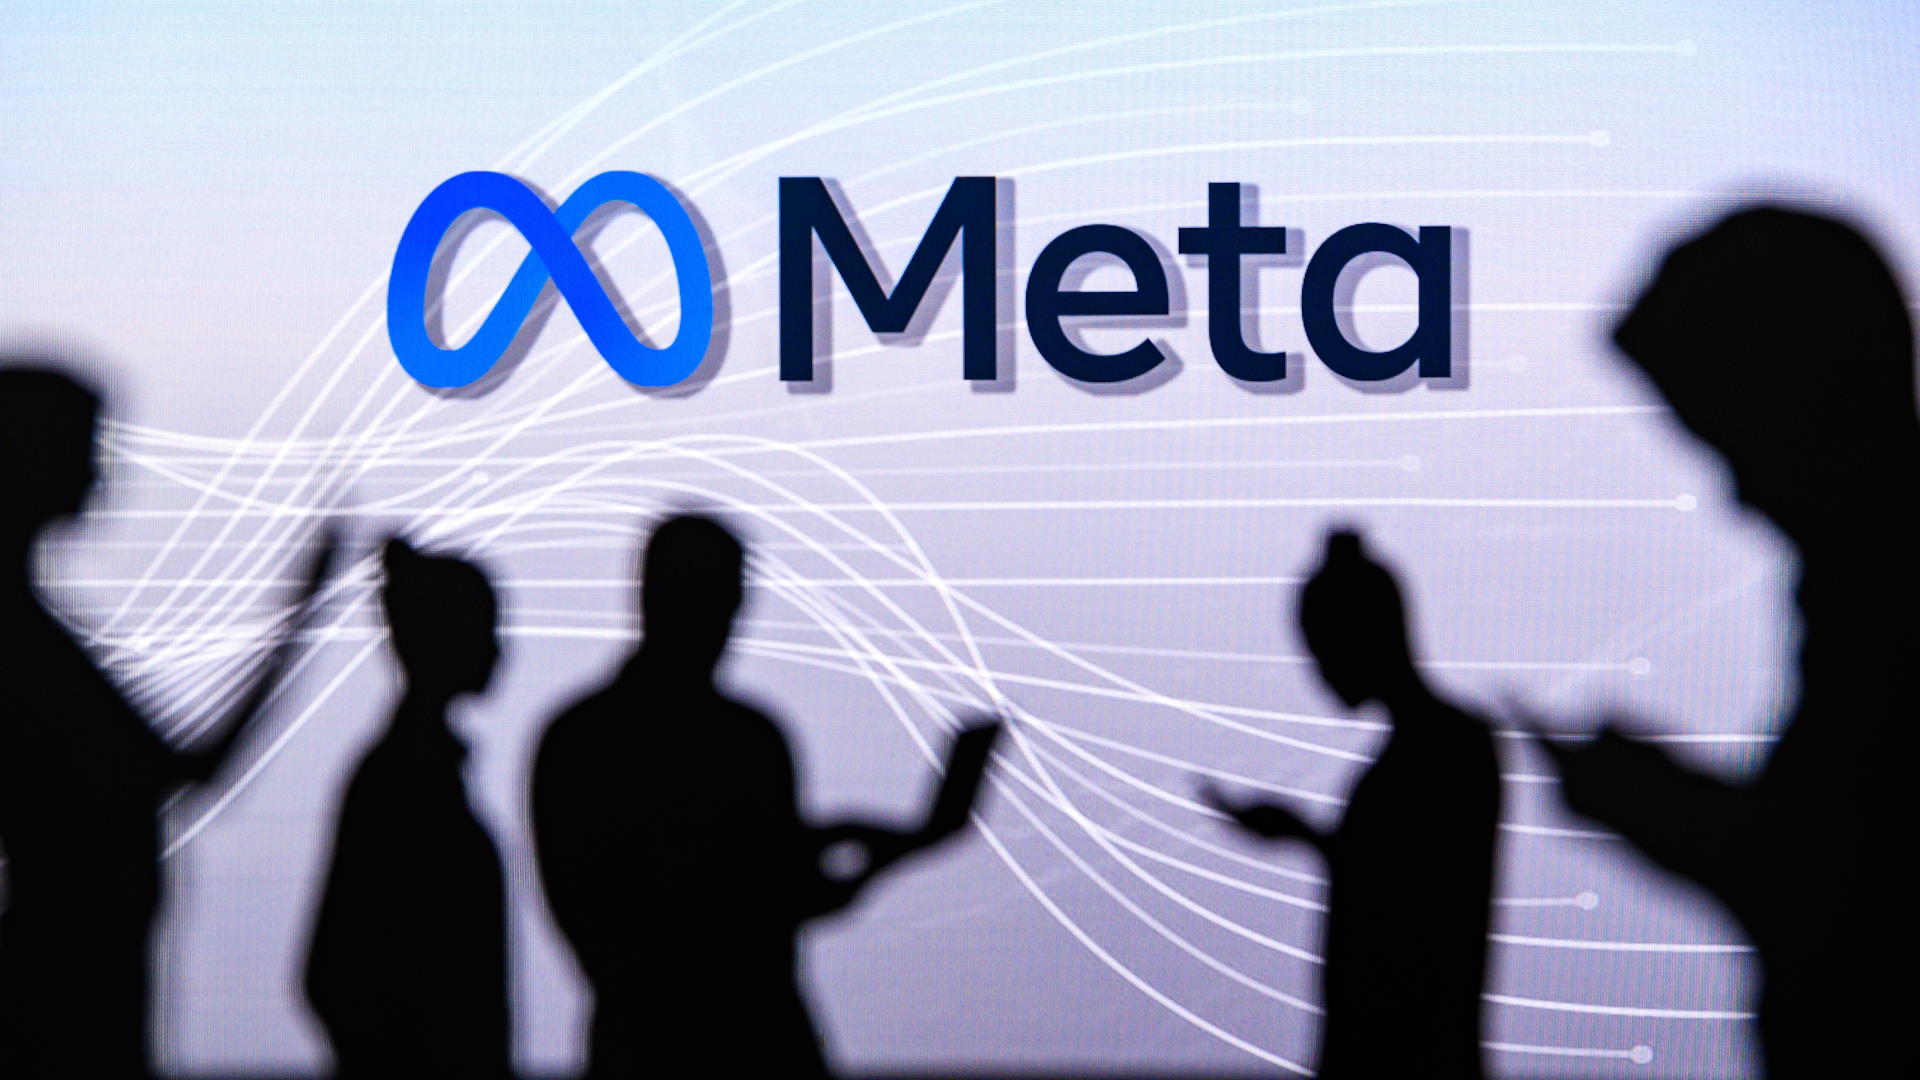 Meta will offer data it collects about users to researchers of “well-being” topics